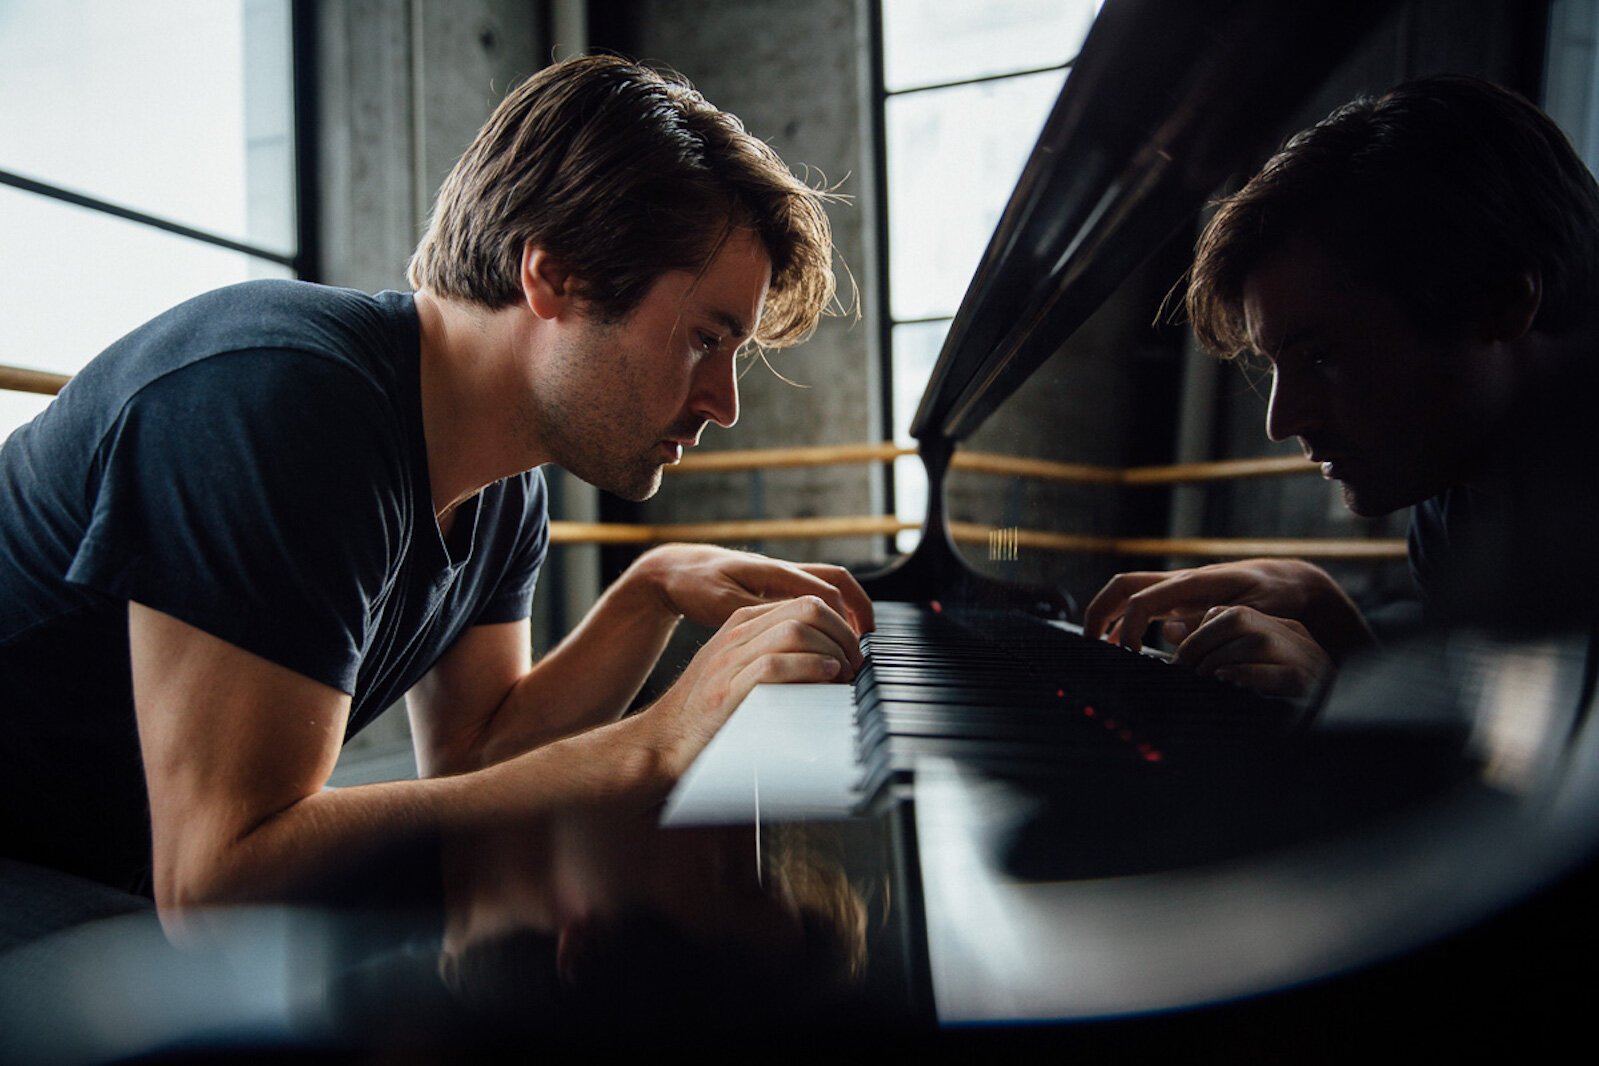 The Dan Tepfer Trio will have two performances in the 2022 Gilmore Piano Festival. The trio will be at the Kool Community Center in Battle Creek on May 12 and at the Civic Auditorium and May 13, both as part of the Jazz at Noon series.